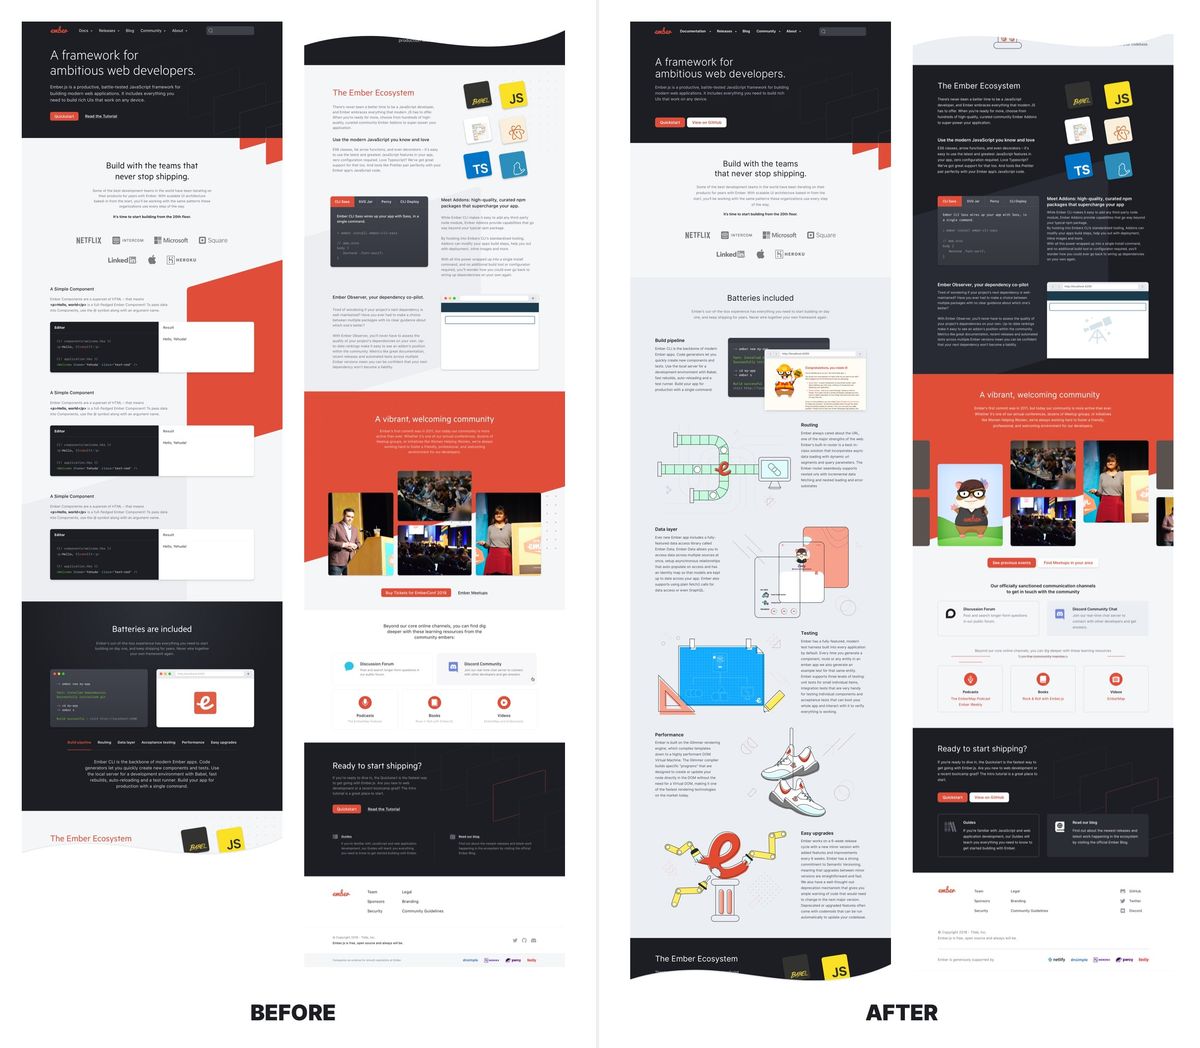 Side by side comparison of the original website mockup from the RFC and the final mockup created by me